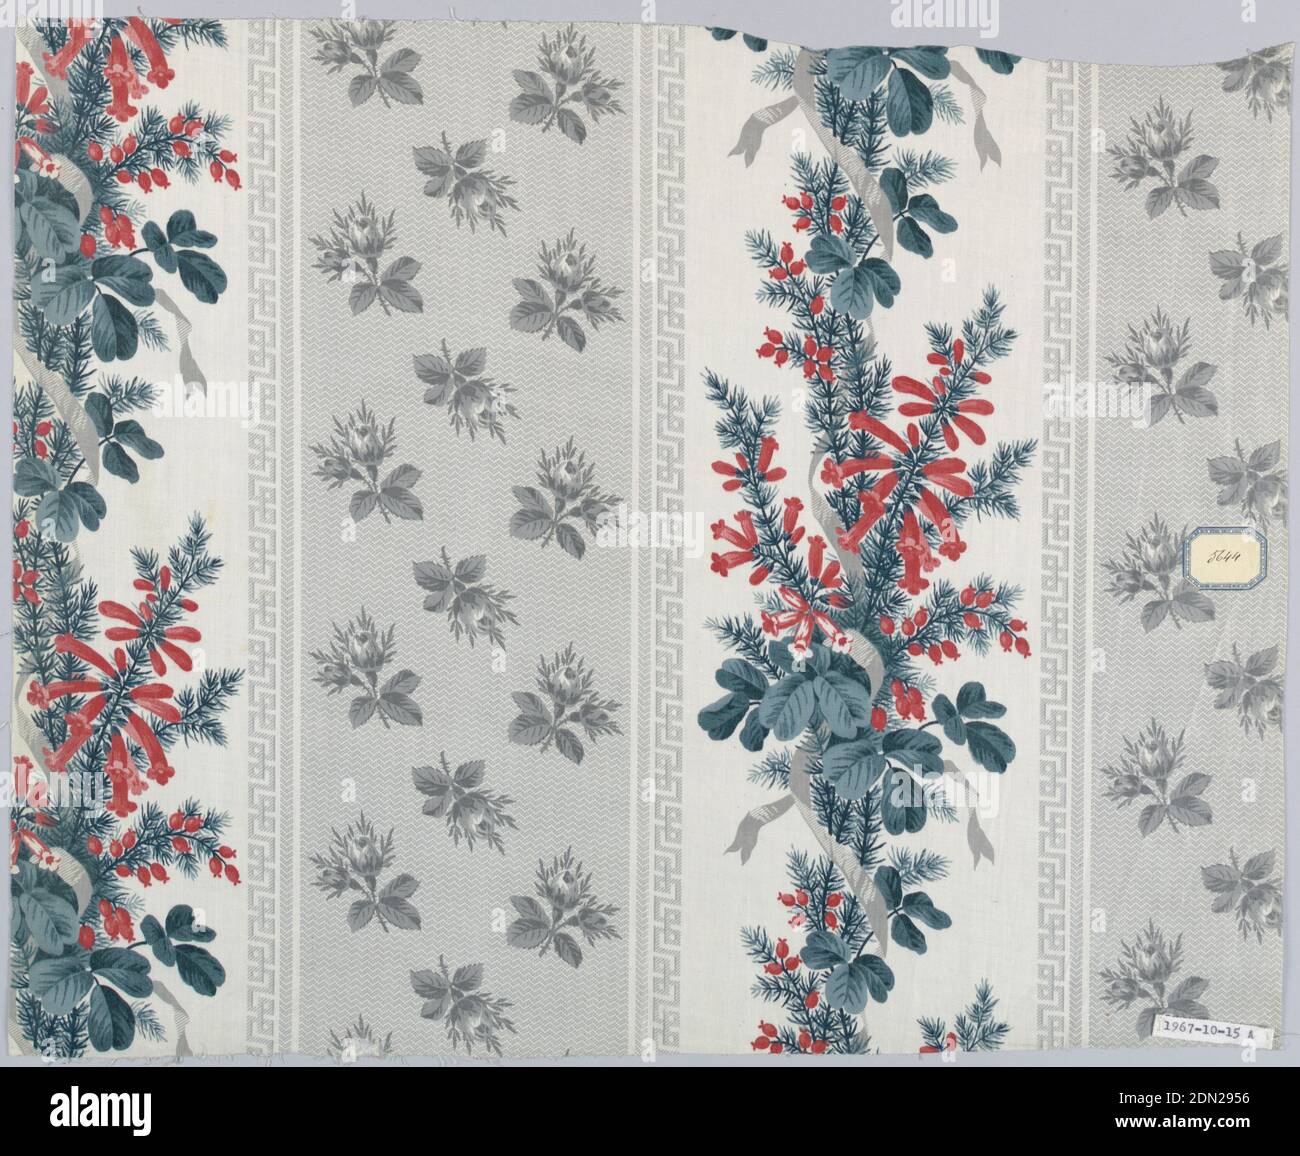 Textile, Schwartz-Huguenin, Medium: cotton Technique: printed by engraved roller on plain weave, A) Ground divided into broad stripes, one fancy ground of gray with small rosebuds in darker gray; broad white stripe with stiff green foliage bearing pink bell-shaped blossoms., B) Similar ground plan but with broad blue stripe made of diamond shapes., 1851–63, printed, dyed & painted textiles, Textile Stock Photo